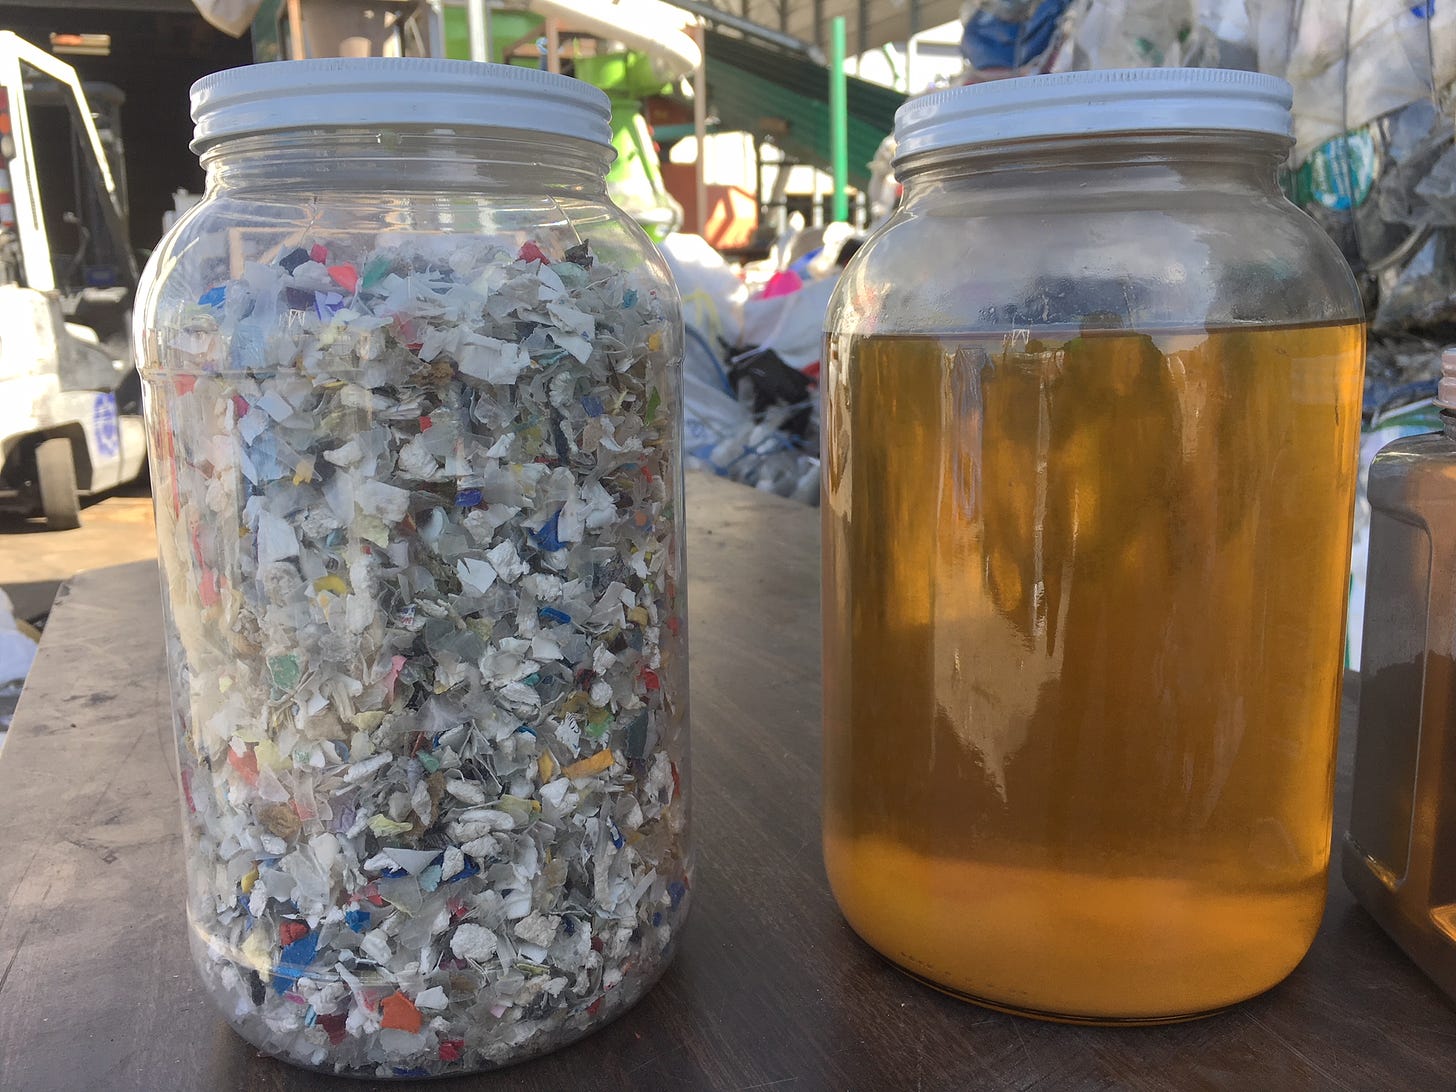 Salt Lake-based Renewlogy has a solution for the plastic waste problem